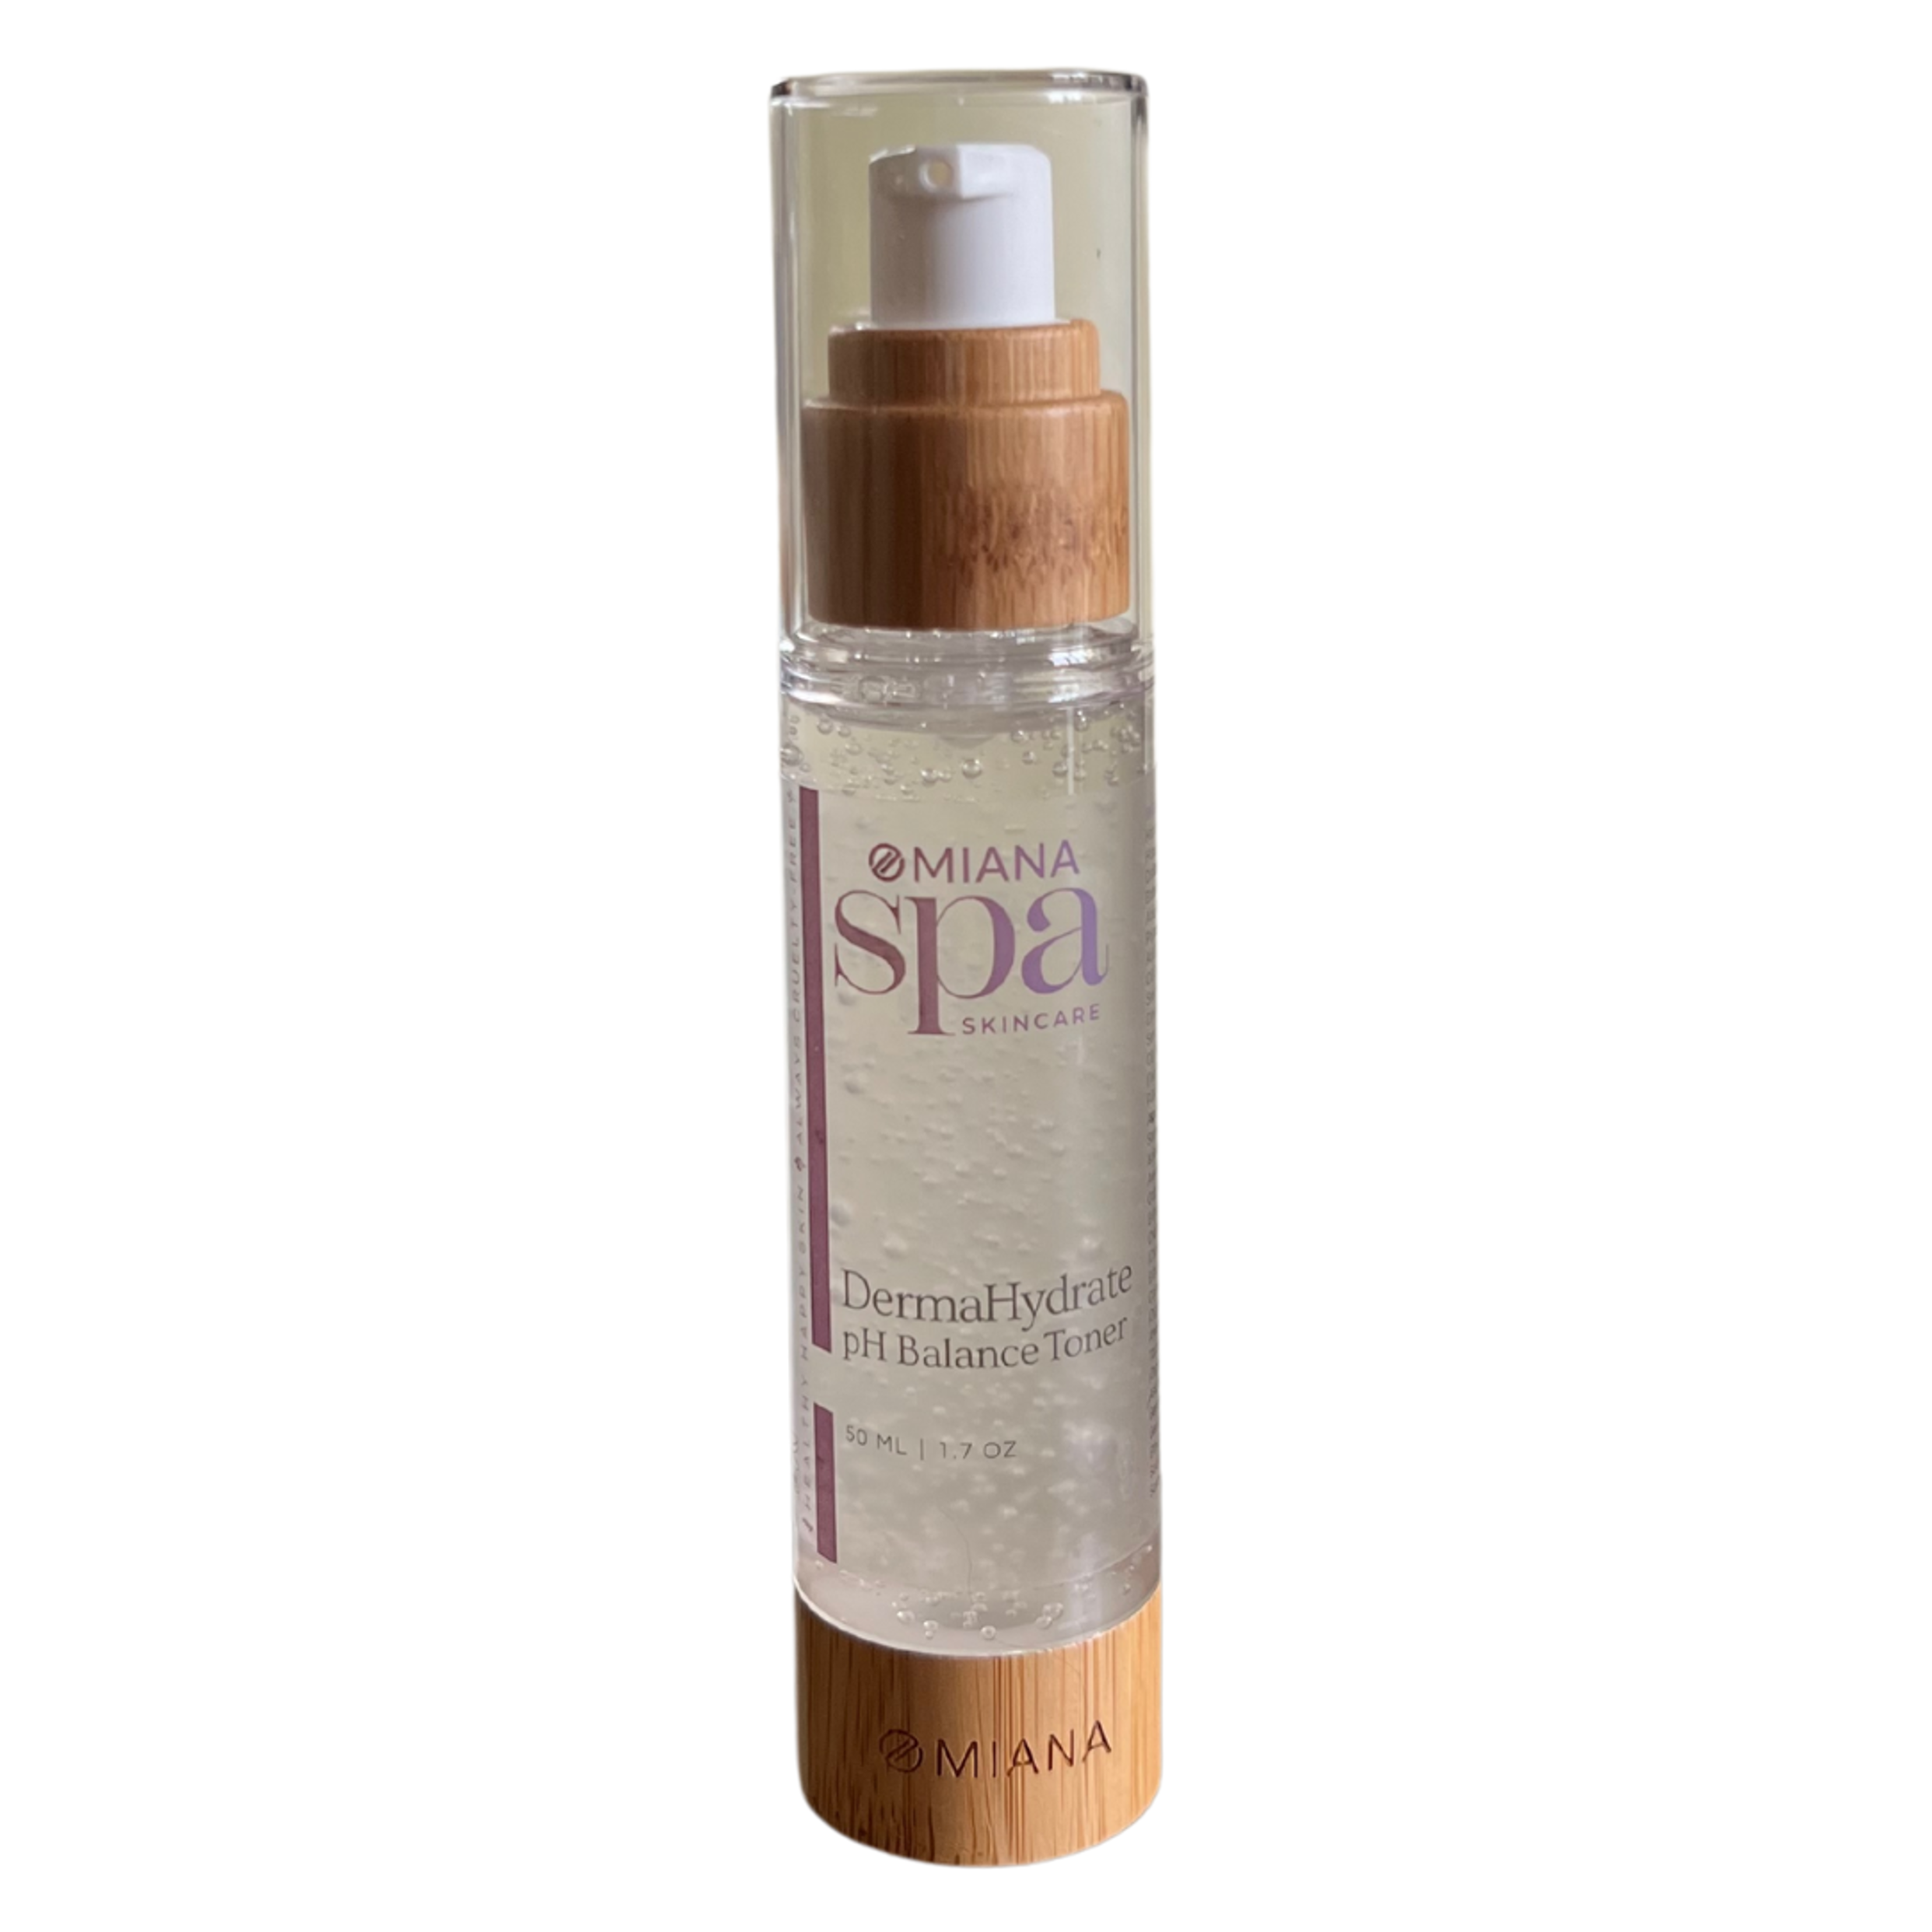 DermaHydrate pH Balance Toner - 100% Free From GMOs, Artificial Fragrances, & More!